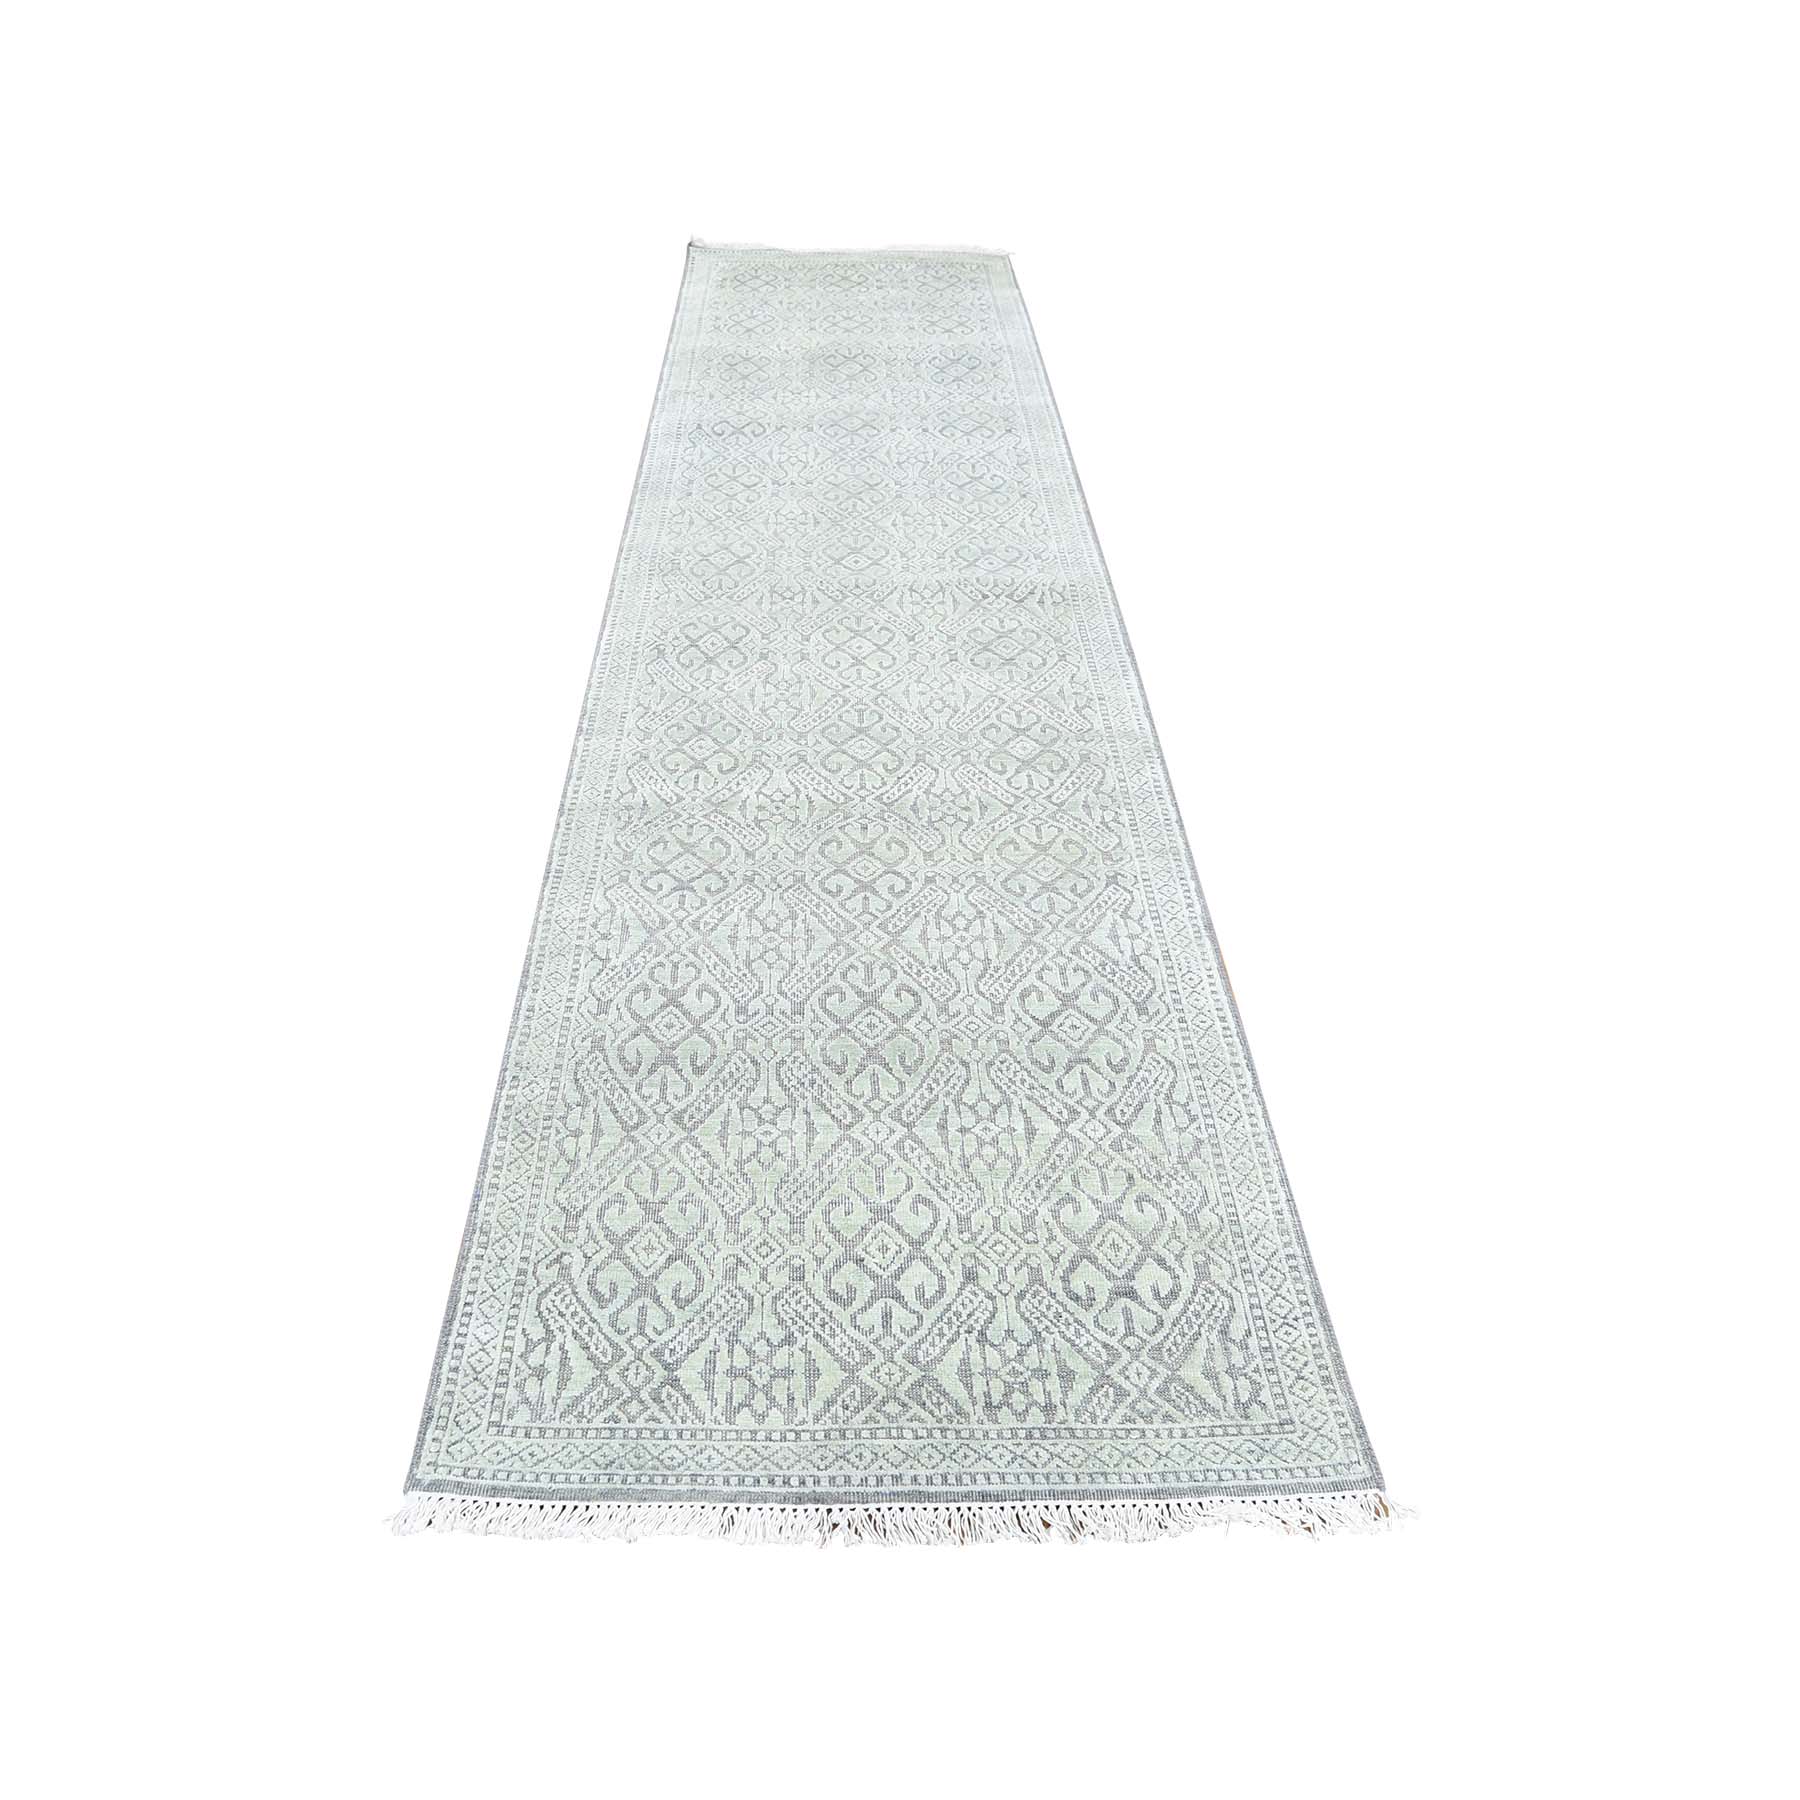 2'7"x10'4" Hand Woven Tone on Tone Silk with Textured Wool Runner Oriental Rug 